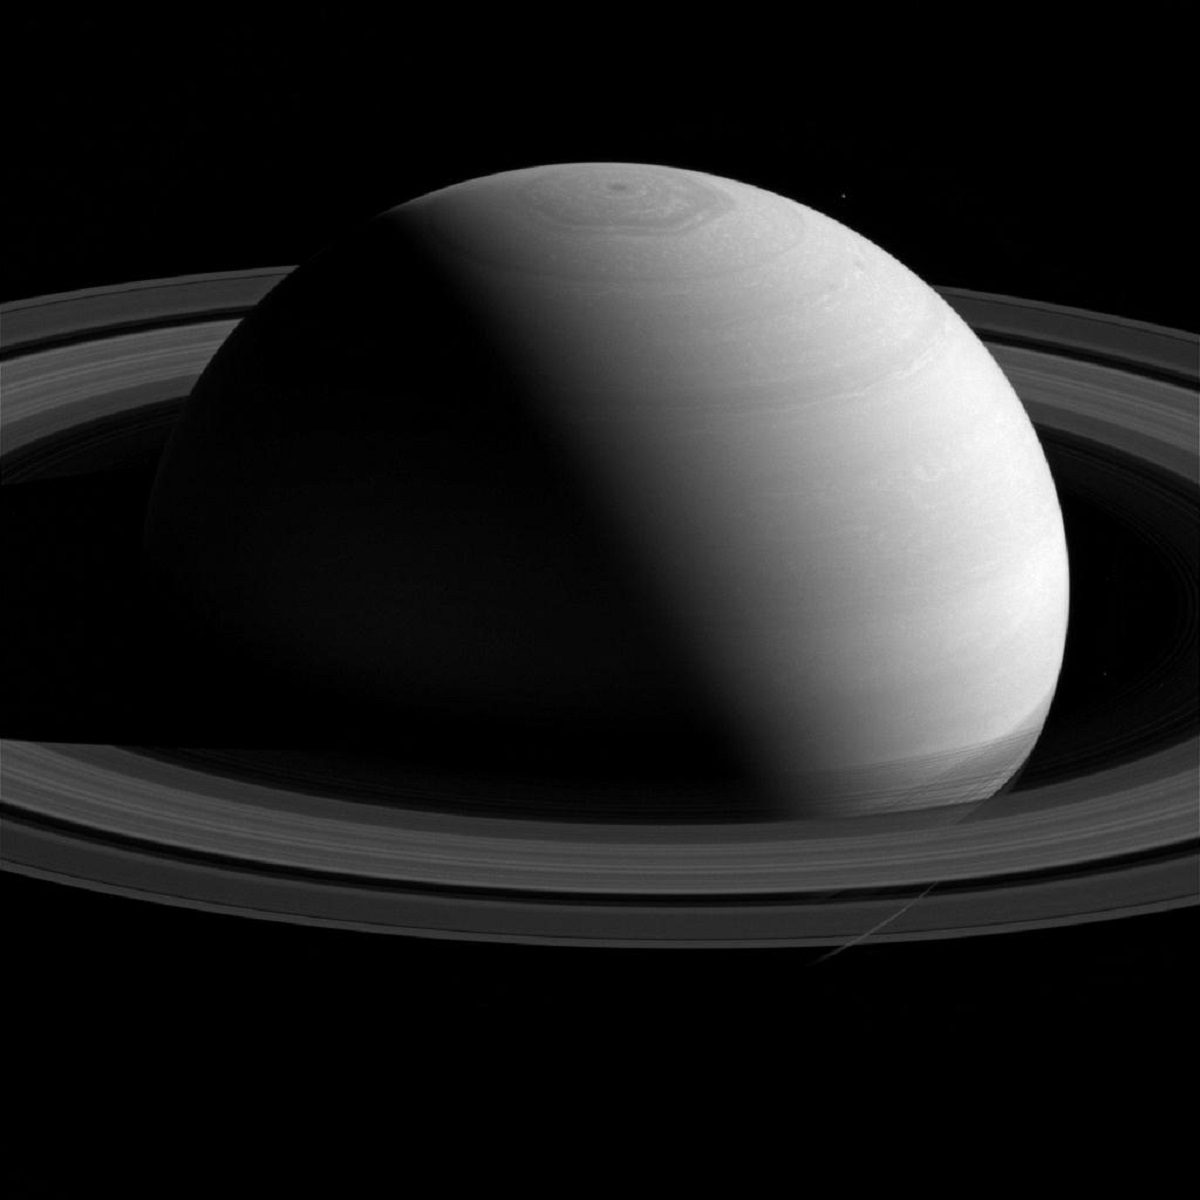 Saturn looks peaceful from a distance - NASA photos on Silver Magazine www.silvermagazine.co.uk